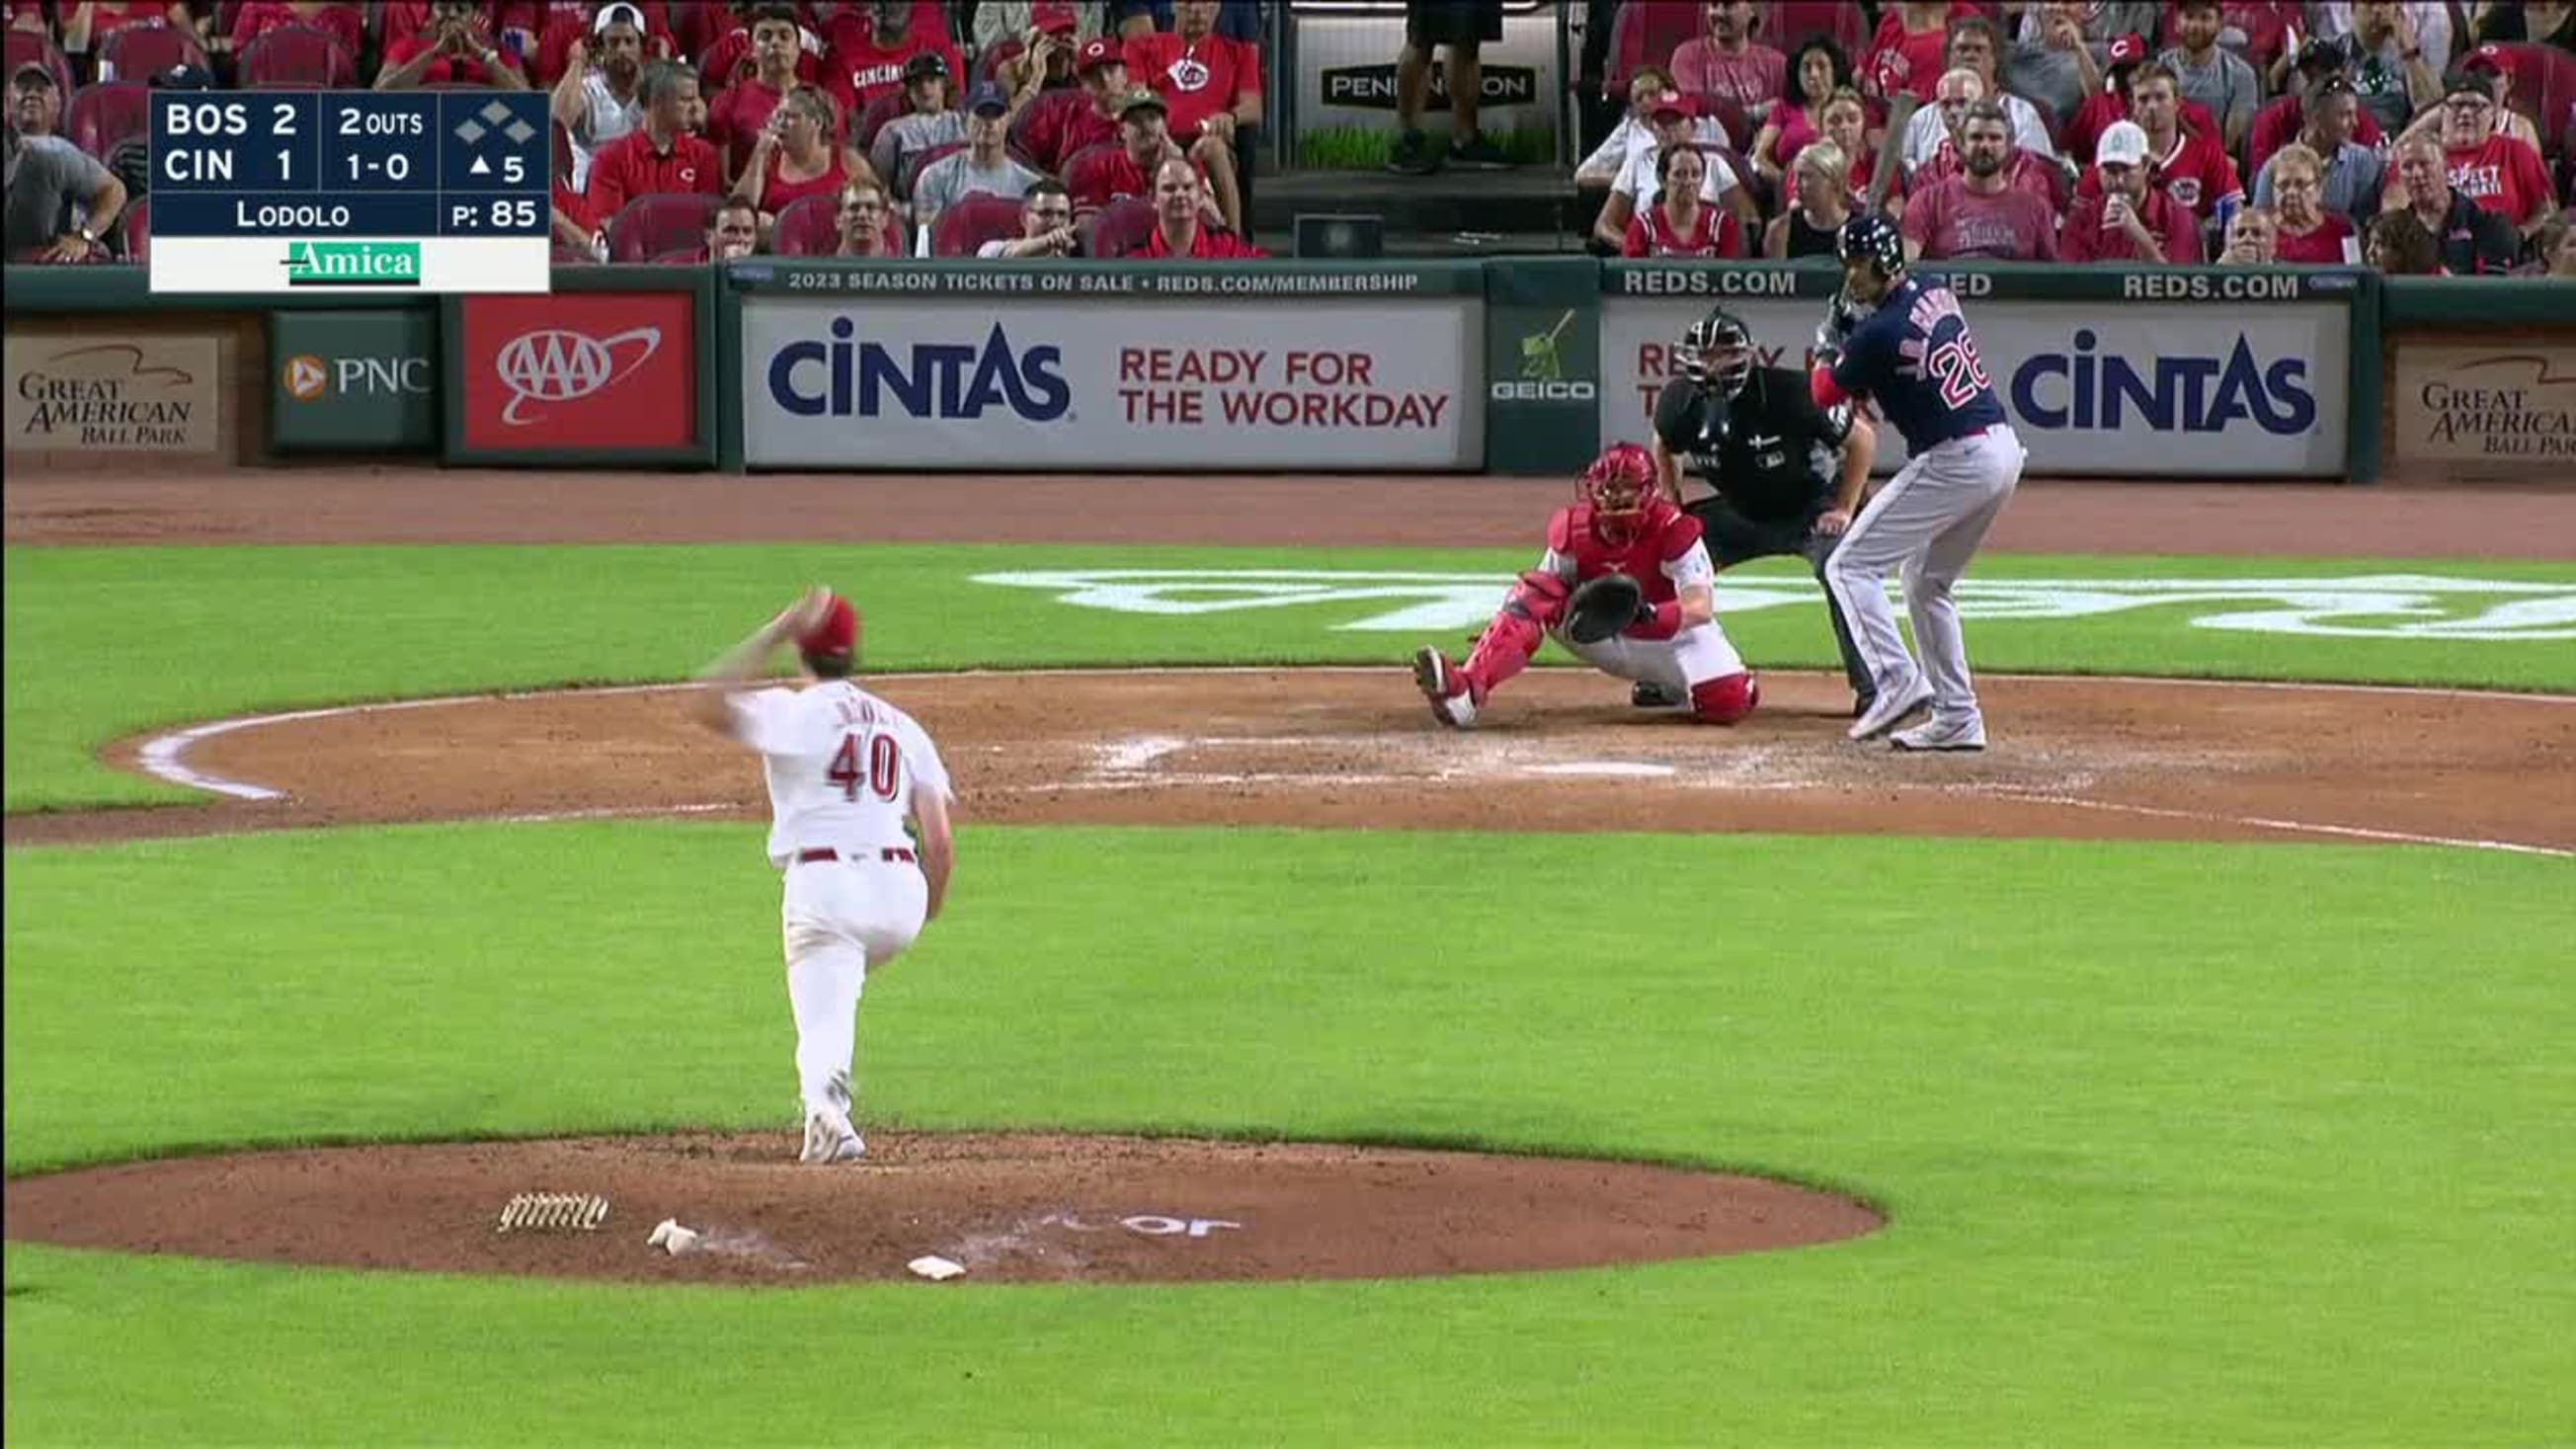 J.D. Martinez pads the lead with a solo homer in Game 5 of the WS